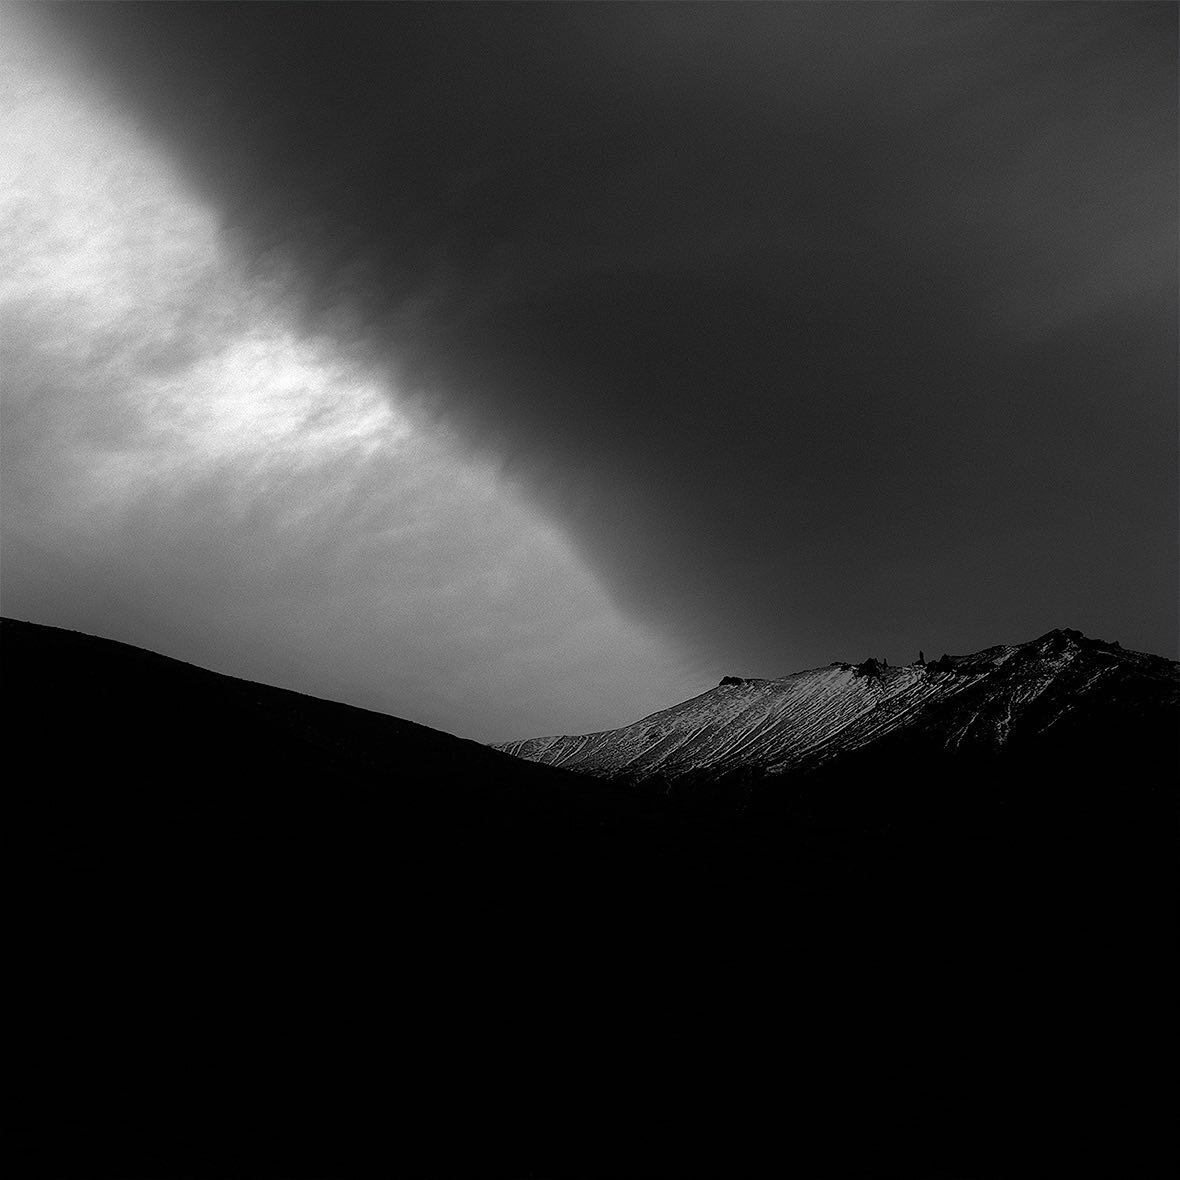 STORM CLOUDS PATAGONIA⁠⁠
⁠⁠
⁠#Torres_del_Paine_National_Park#Chile_Patagonia #Weather_front #Torres_del_Paine #Patagonia #South_America #monotone #bnw  #Blackandwhitephotography⁠ #abstract #Monochrome_abstract_photography #fineartphotography #bw #Nat